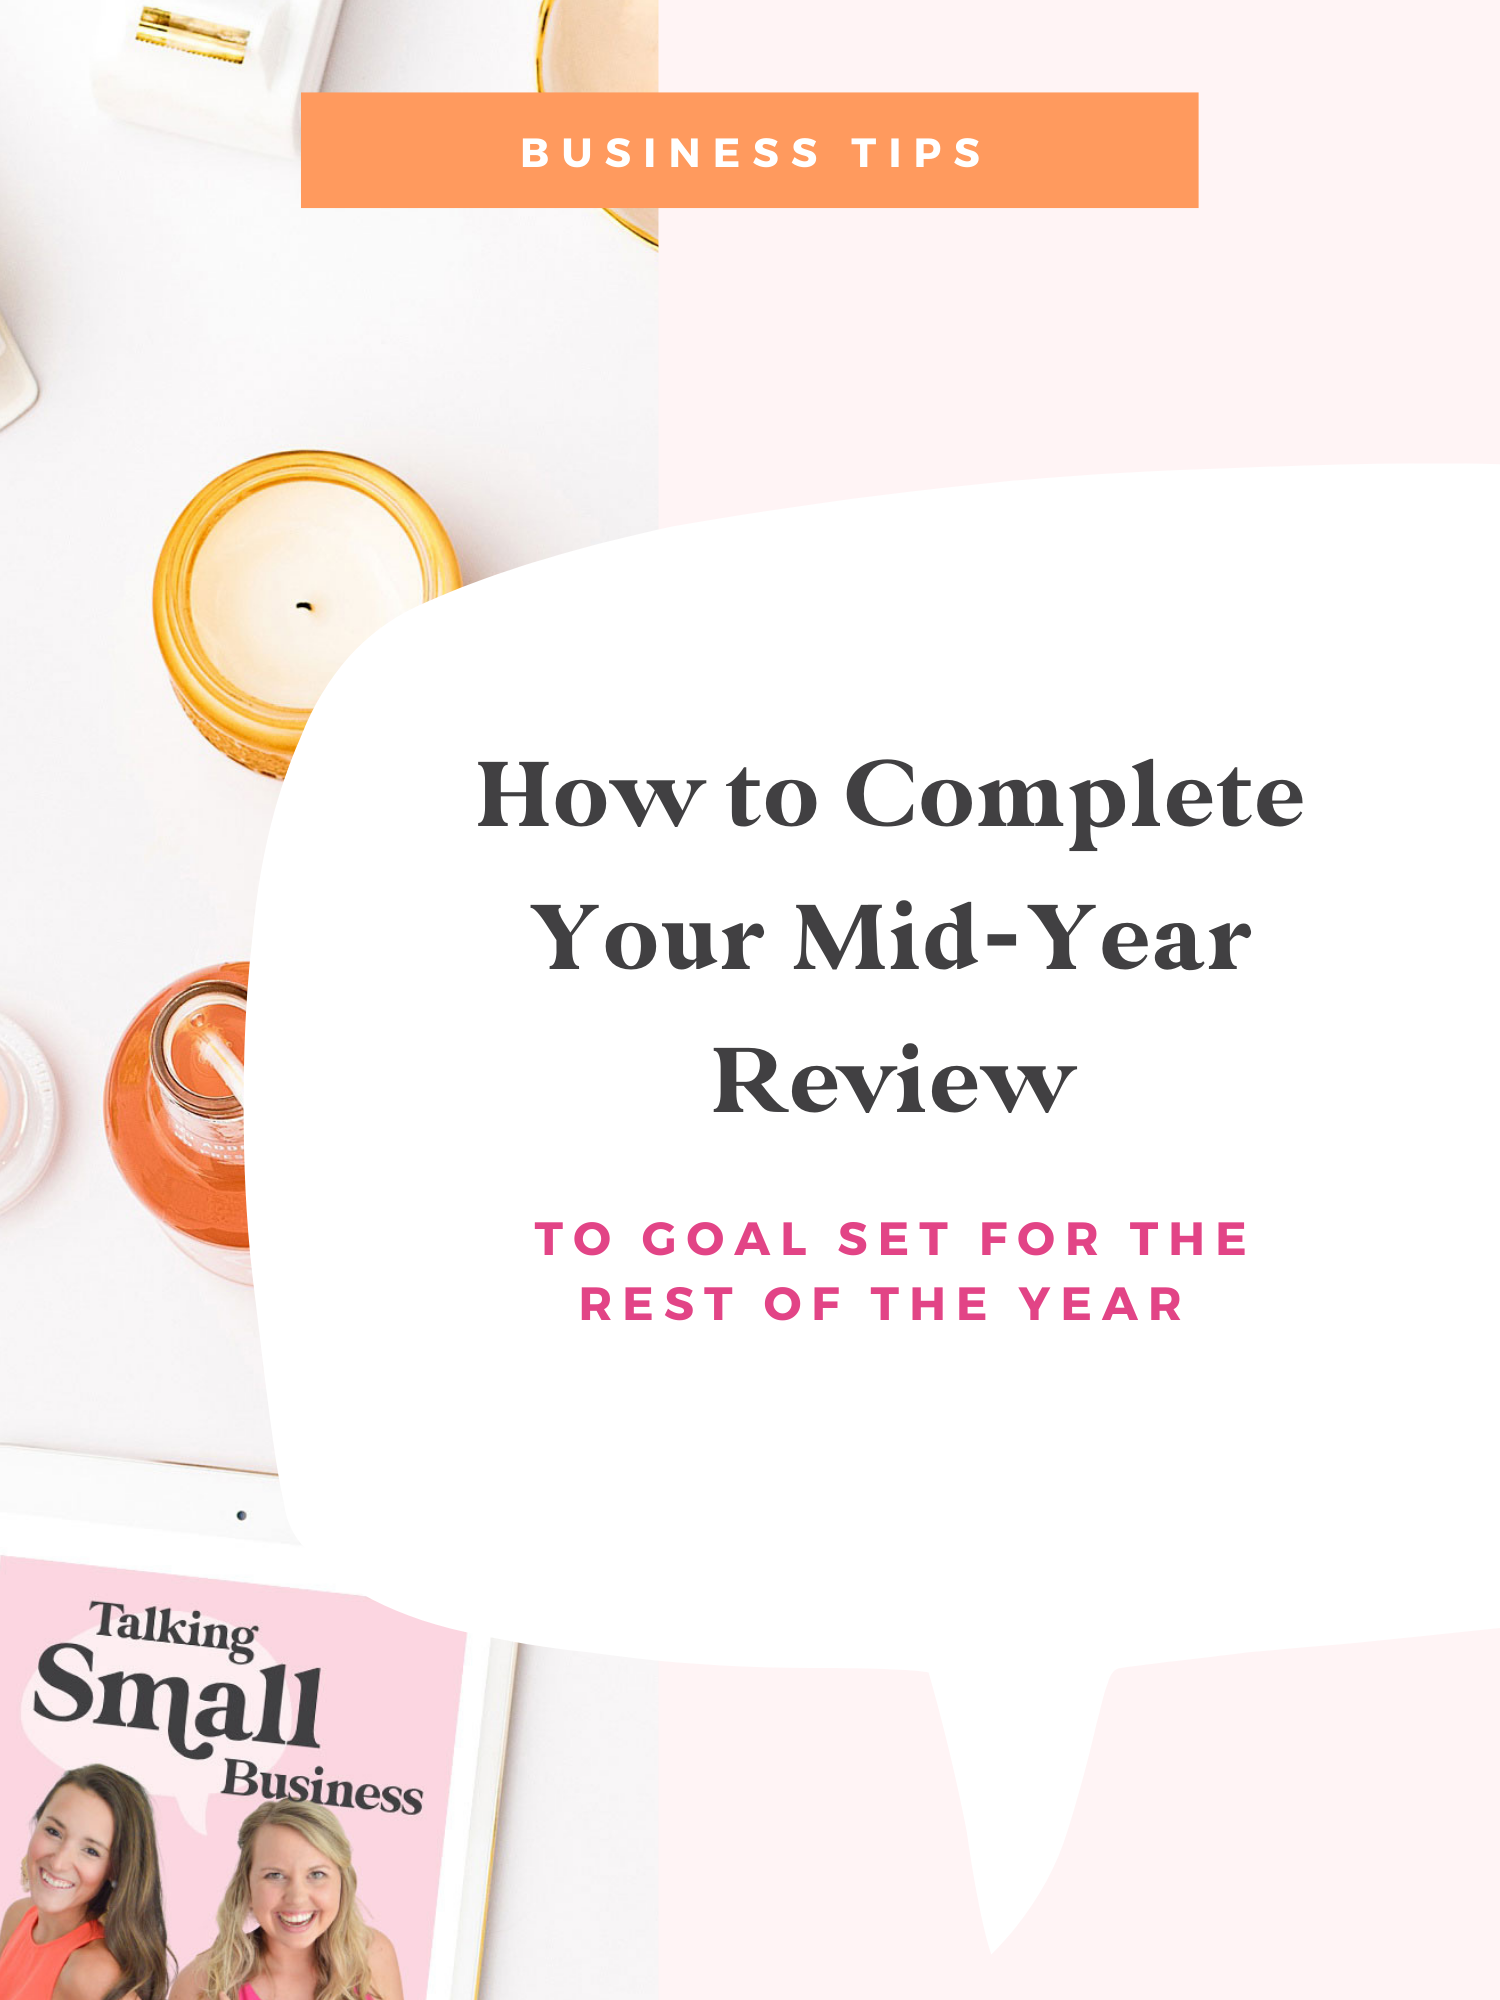 Mid-Year Business Review: tips and strategies to complete a mid-year review to determine your goals and plans for the rest of 2022